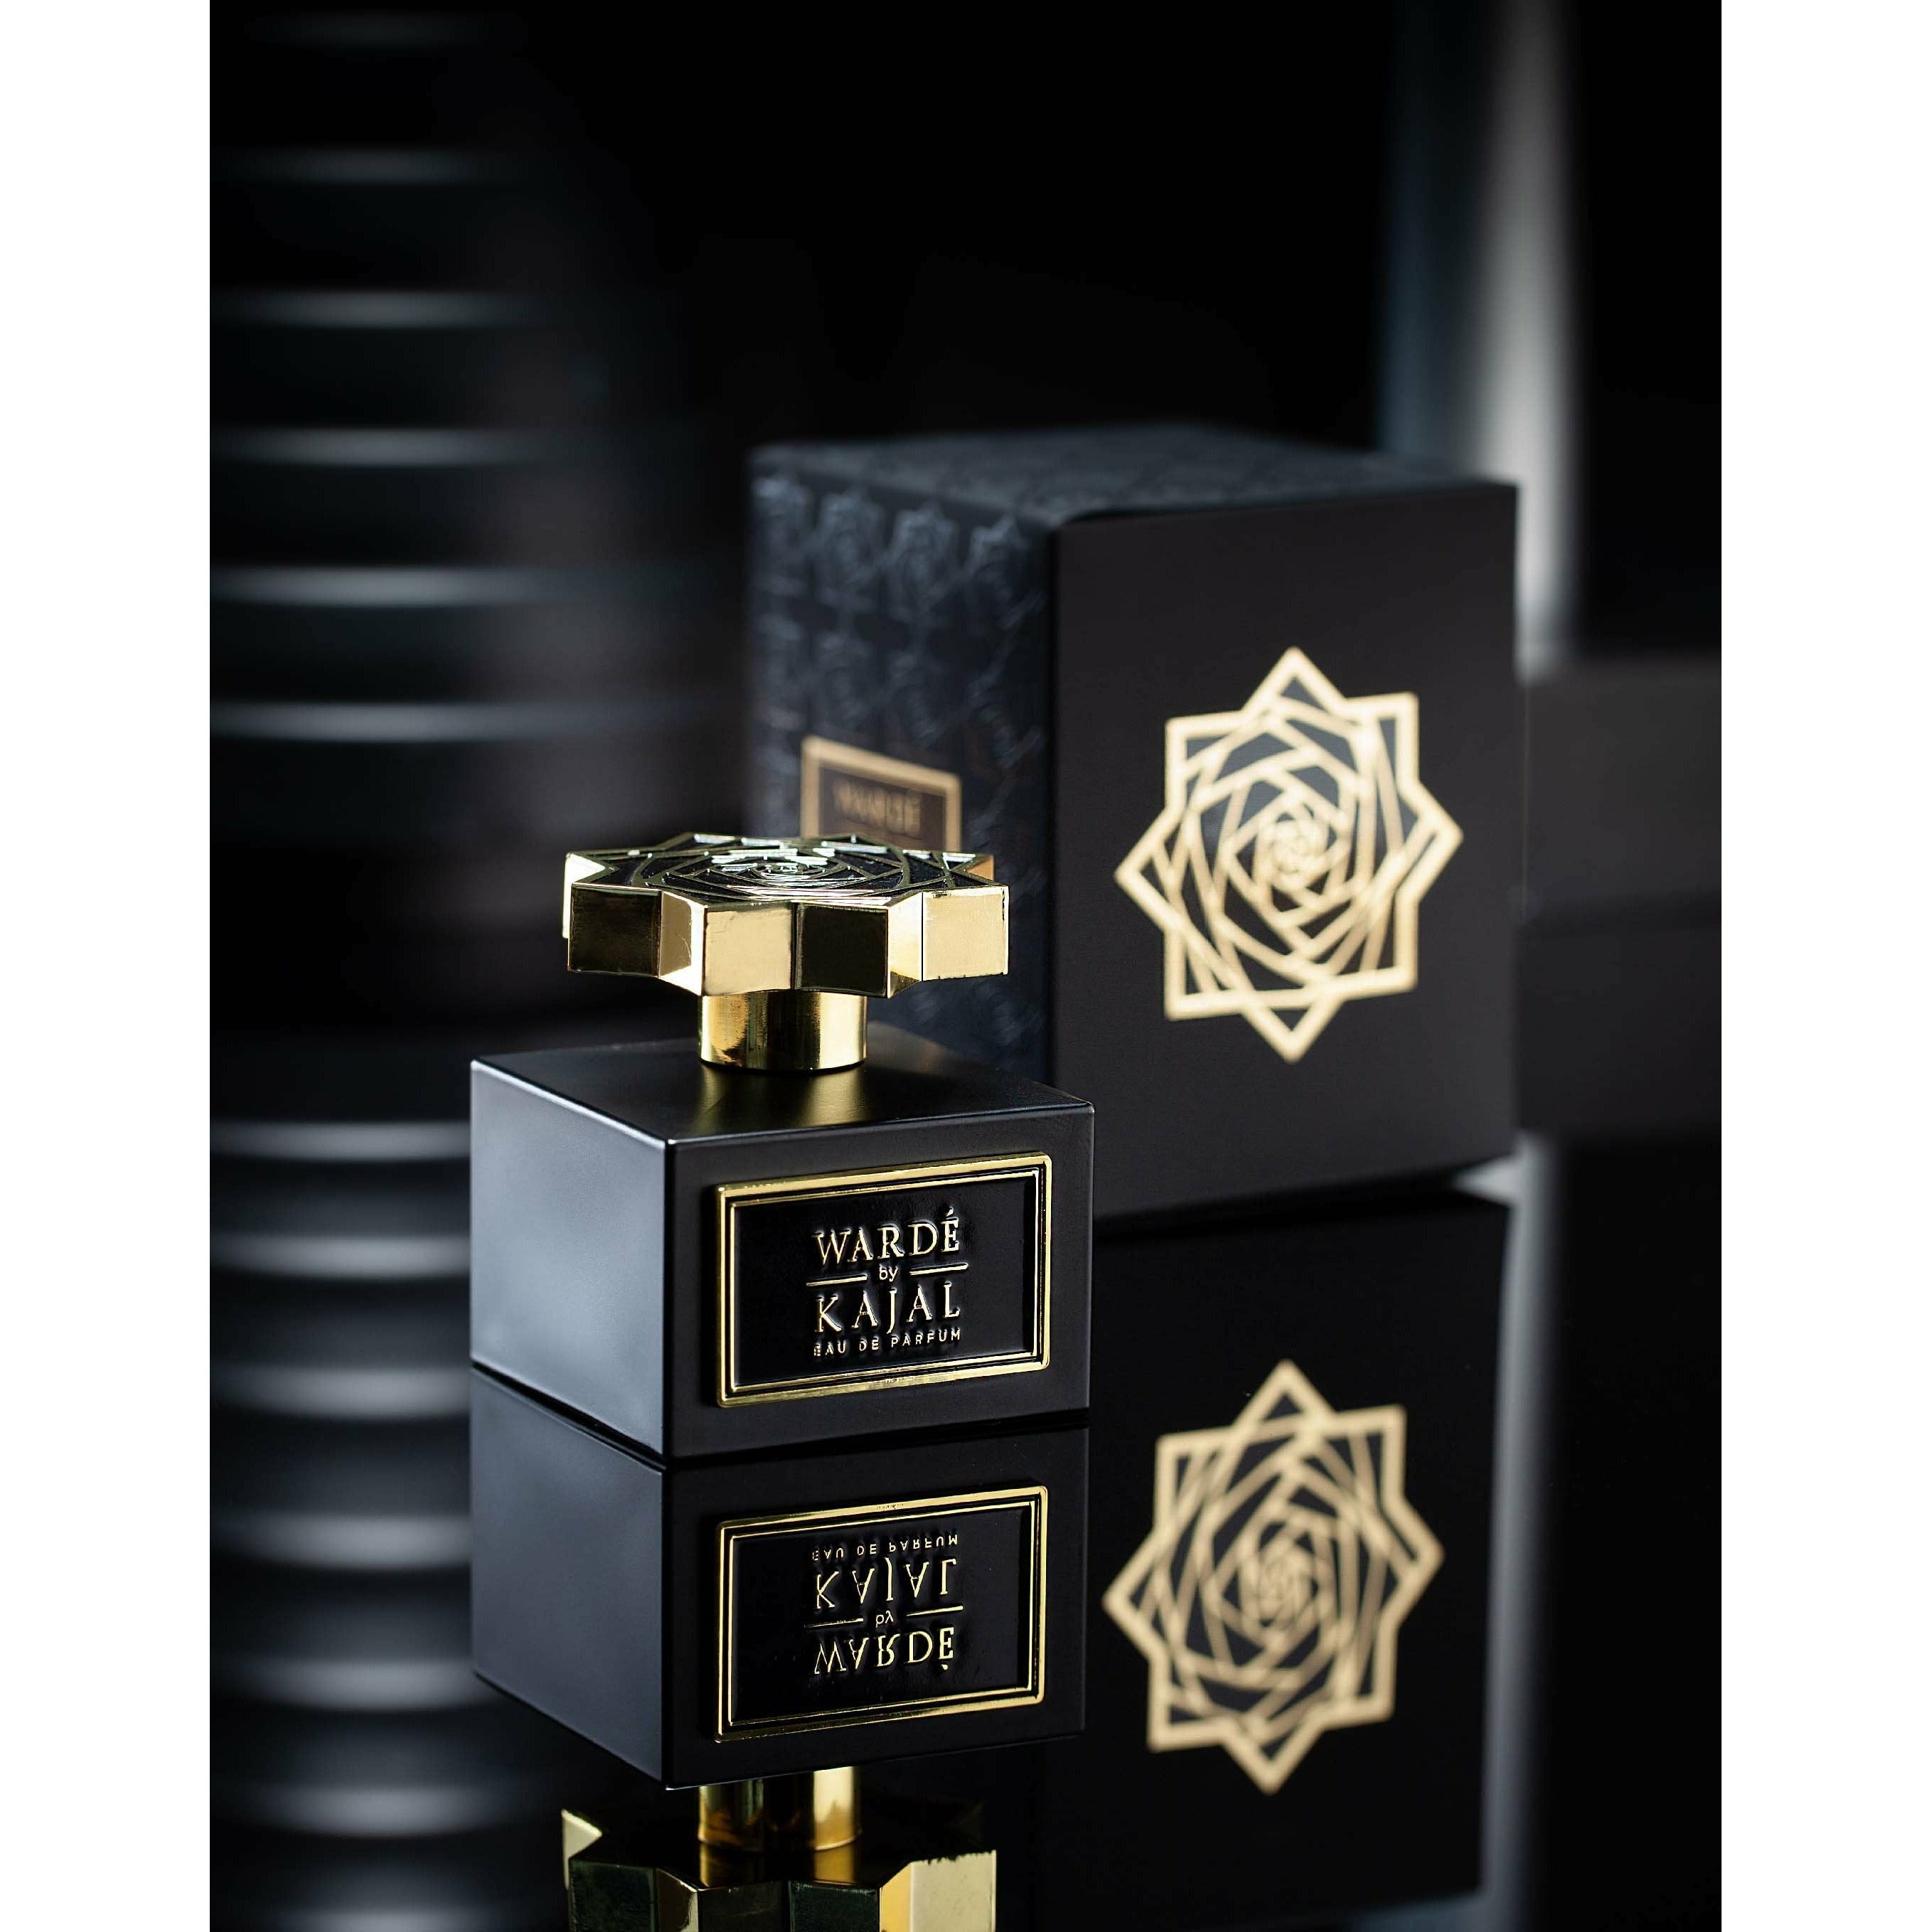 Warde EDP 100ml by Kajal Perfumes. Black cube bottle with gold logo and gold lid. Black carton box embossed with a black flower pattern to one side and a black and gold flower to the other side.